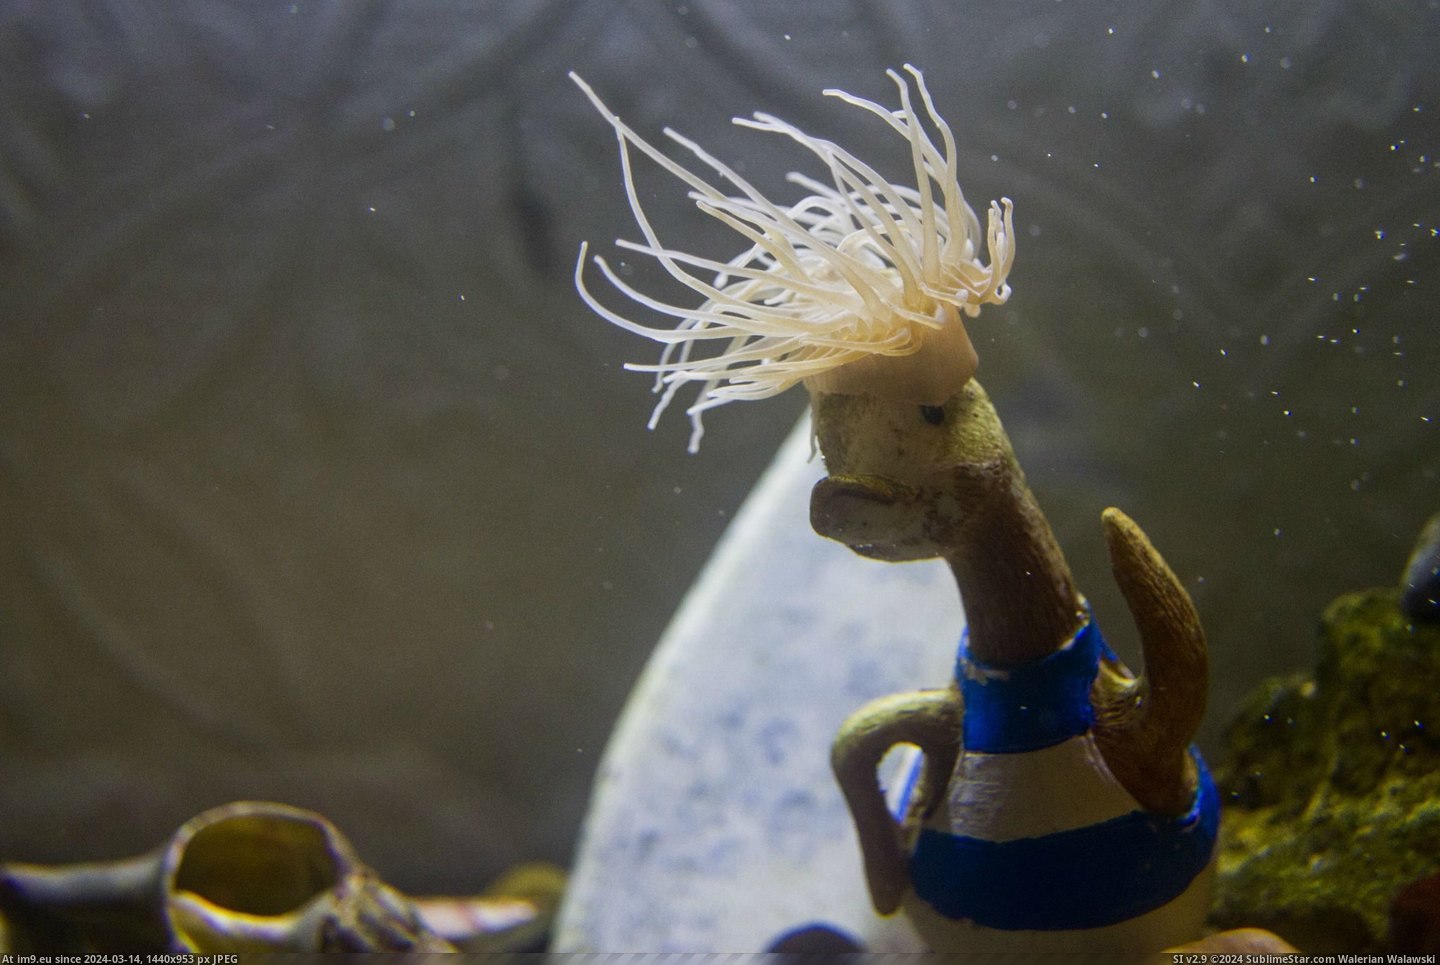 #Beautiful #Head #Decided #Tank #Ornament #Anemone #Latch #Sea #Giving #Duck [Pics] My snakelock anemone has decided to latch onto the head of the sassy duck ornament in my sea tank, giving it beautiful lo Pic. (Obraz z album My r/PICS favs))